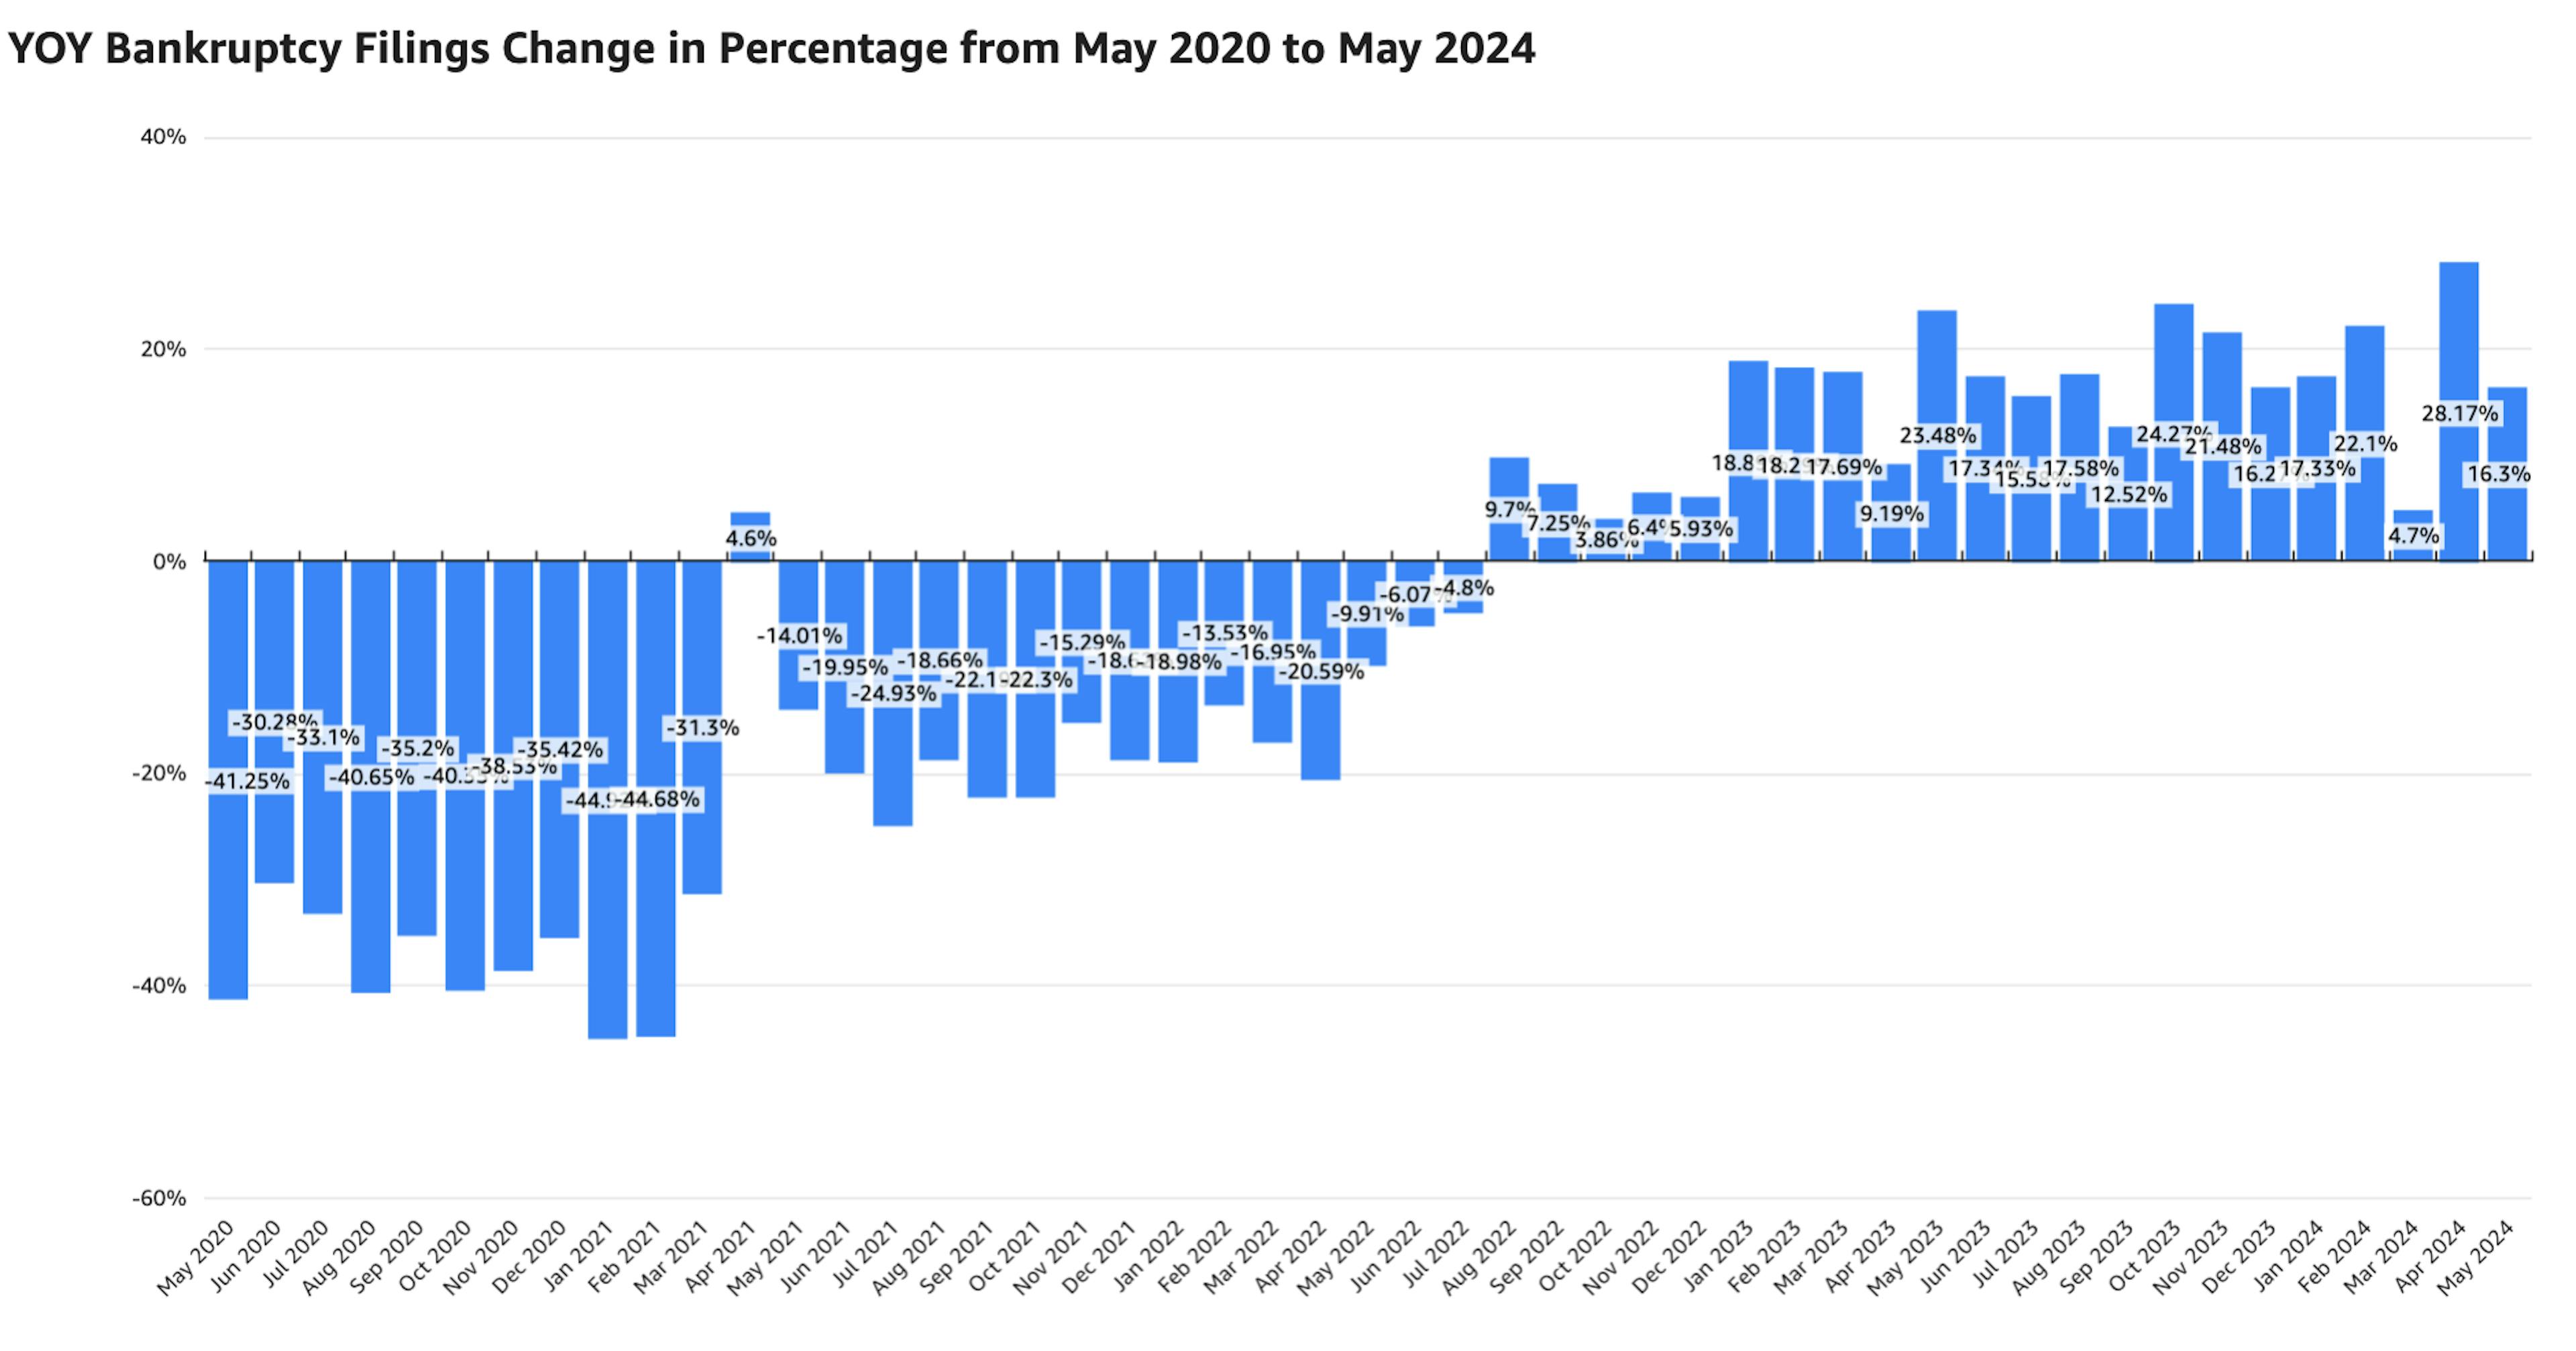 YOY Bankruptcy Filings Change in Percentage from May 2020 to May 2024